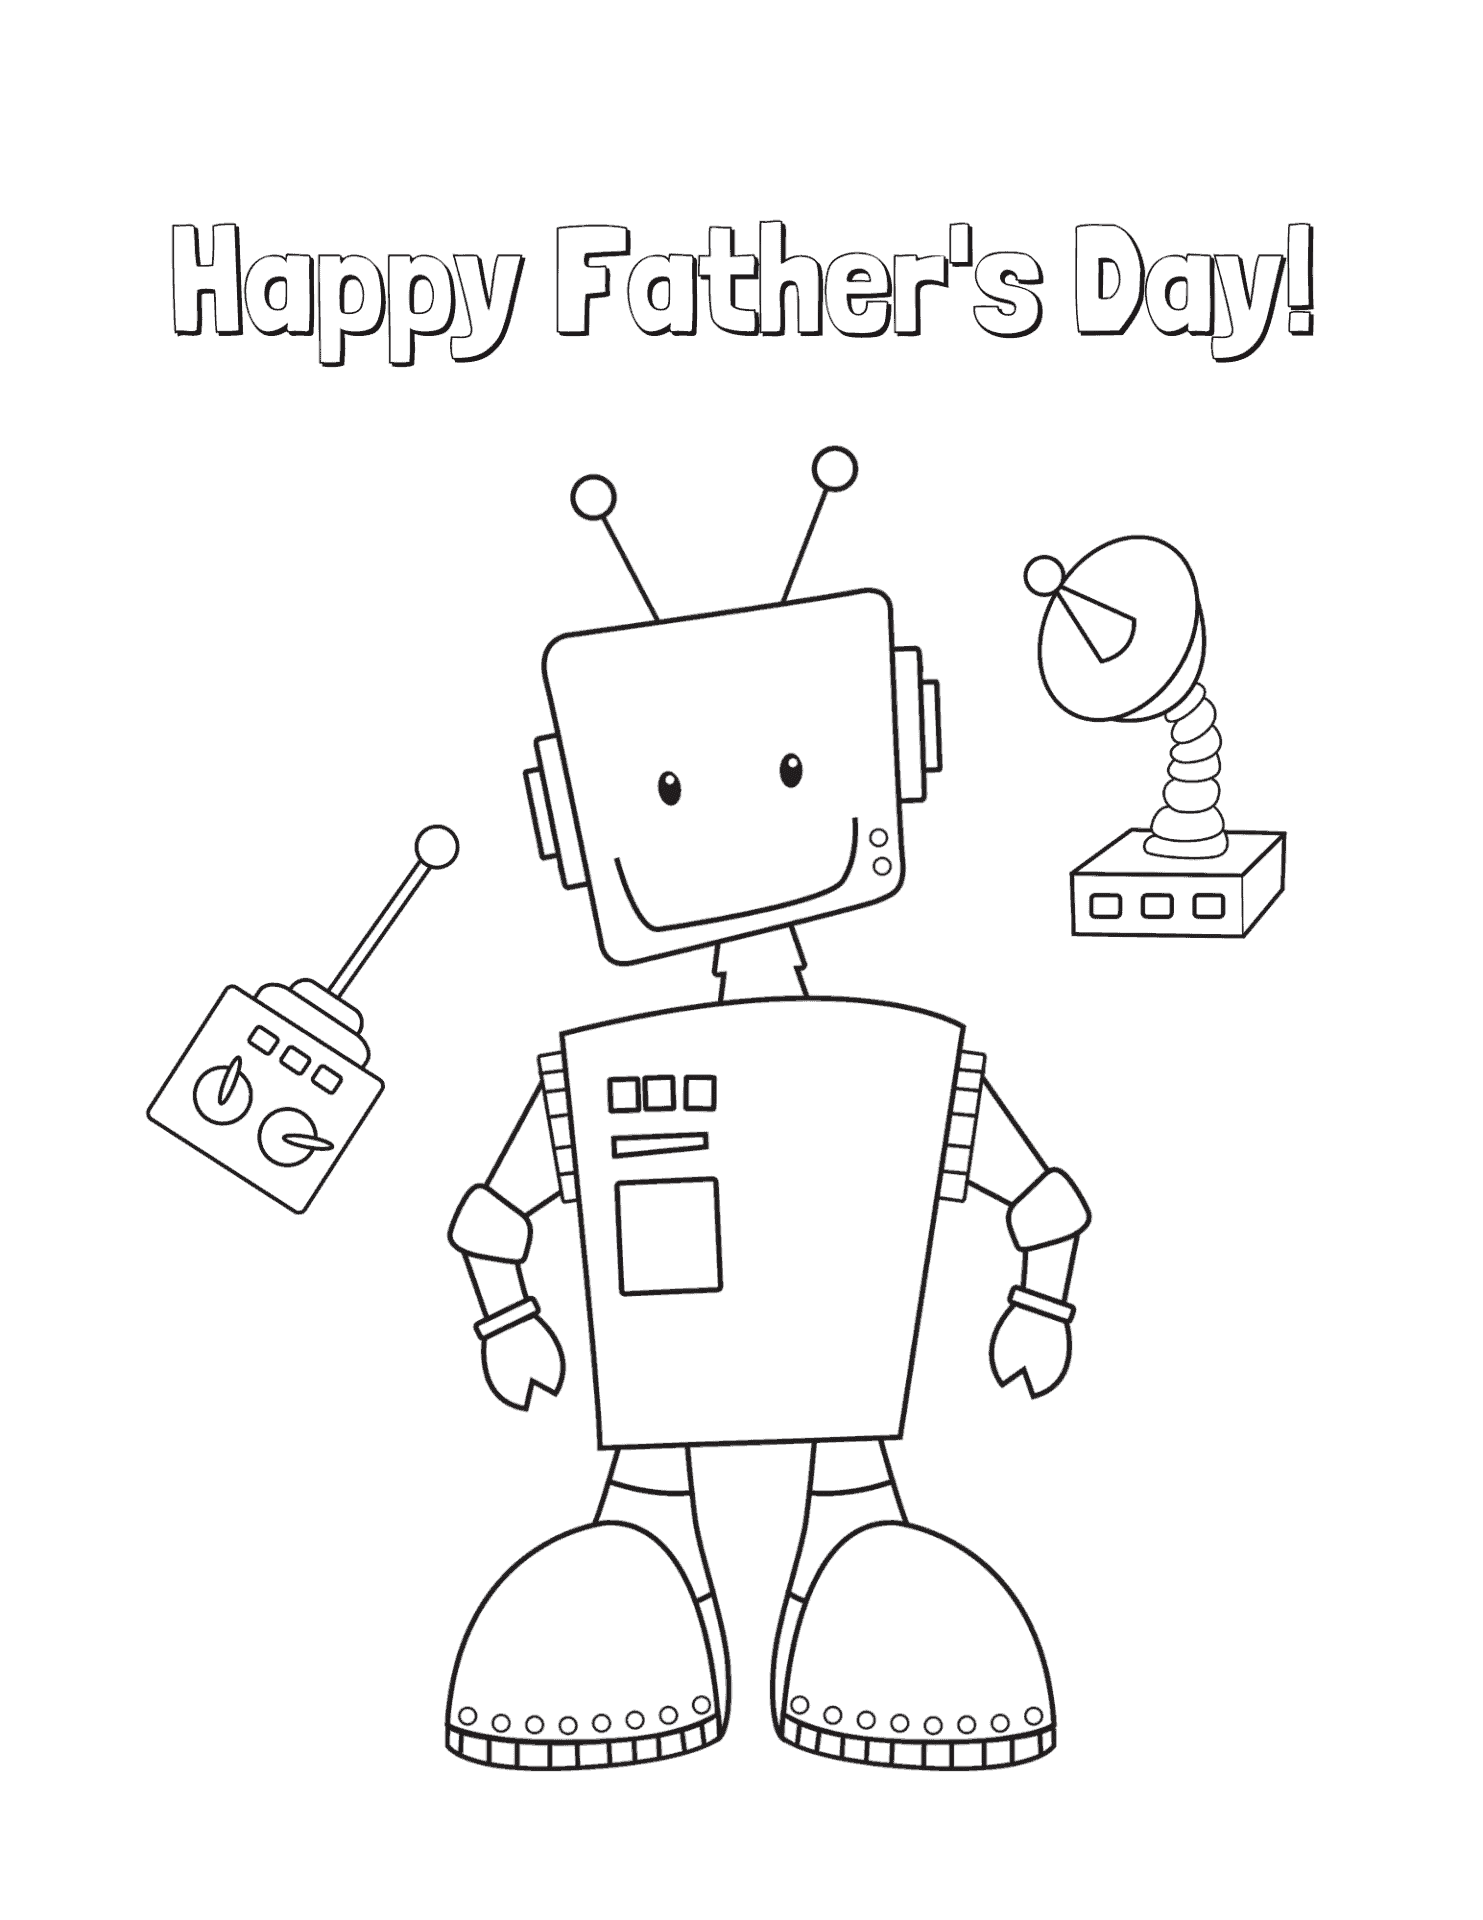 7 Free Father's Day Coloring Pages | Printable | Preschool and Up